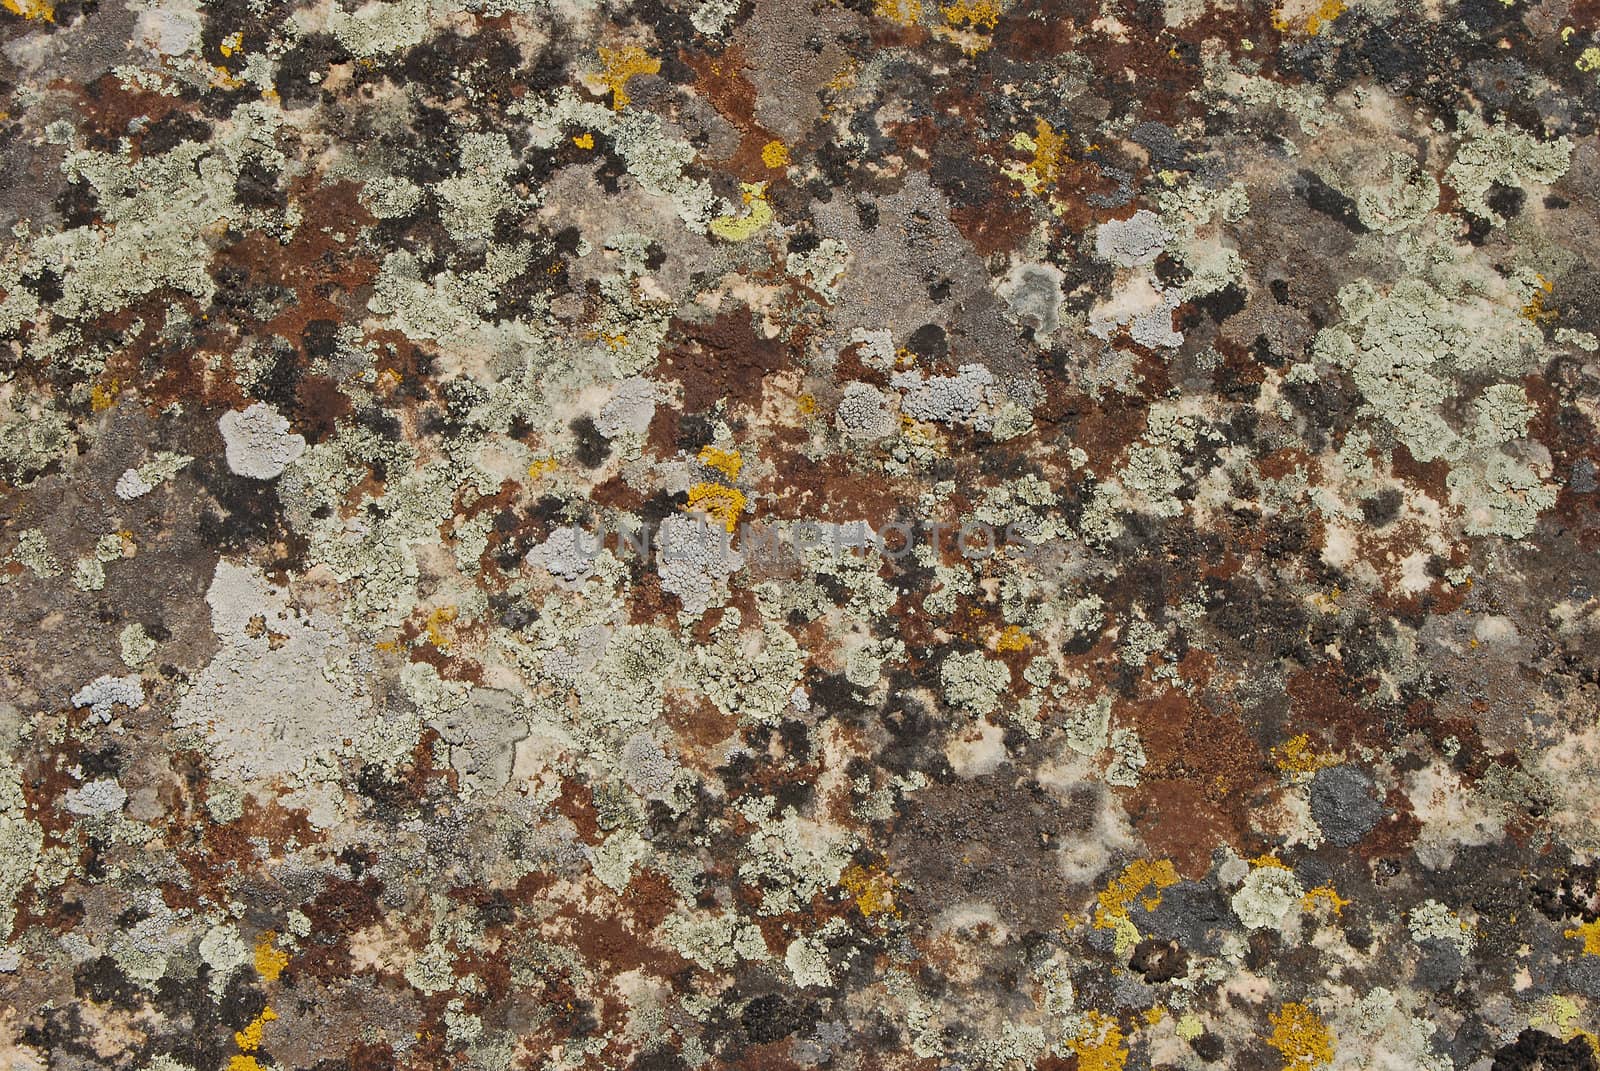 Lichens and dry moss on rock surface as background